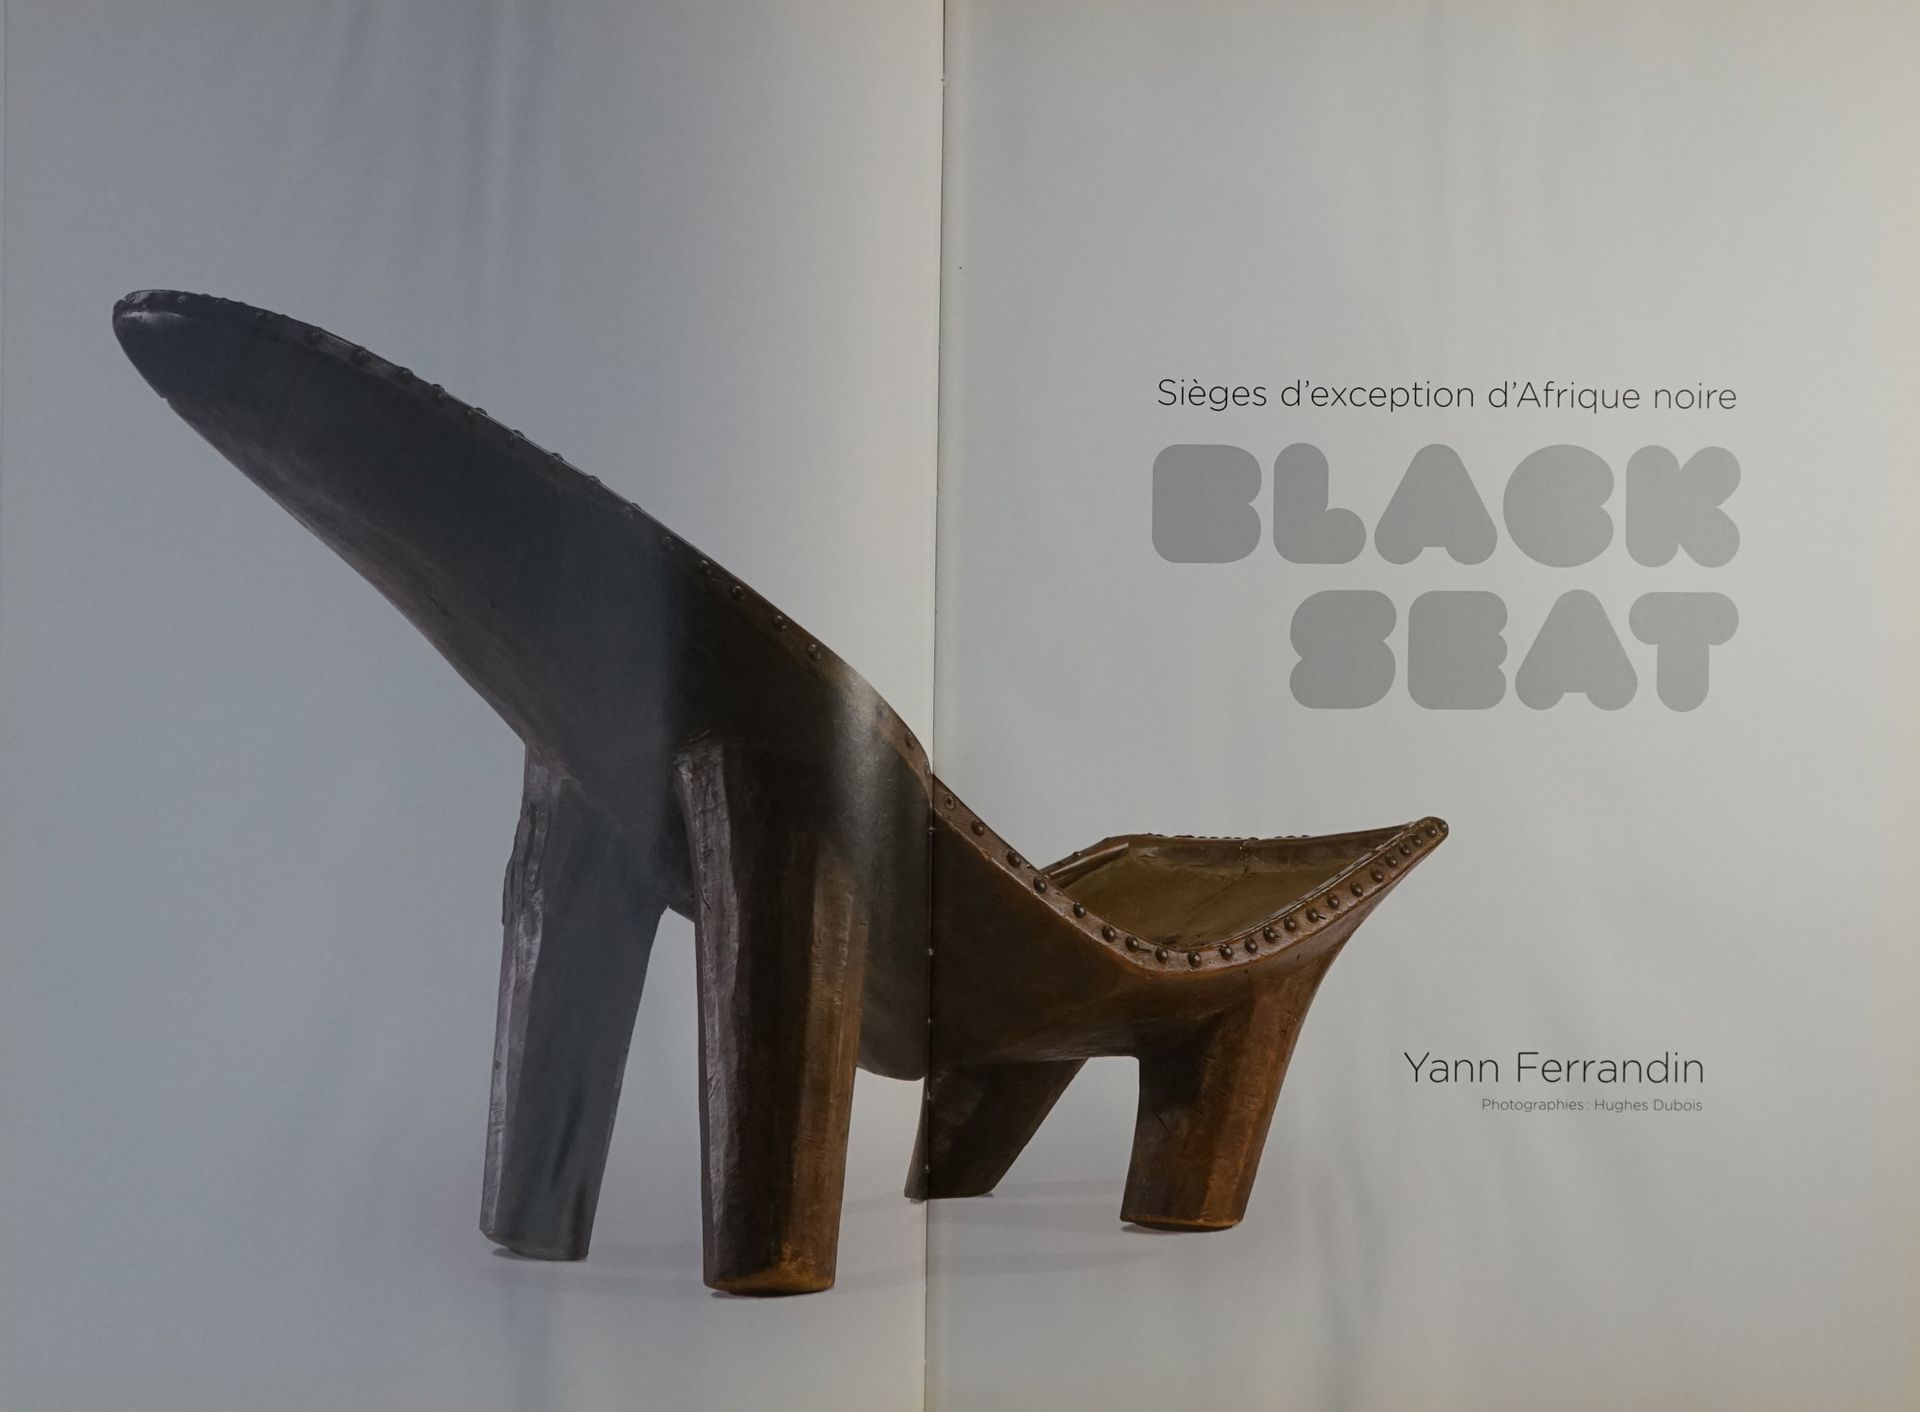 Null "Black seat, exceptional seats of Black Africa", catalog of the exhibition &hellip;